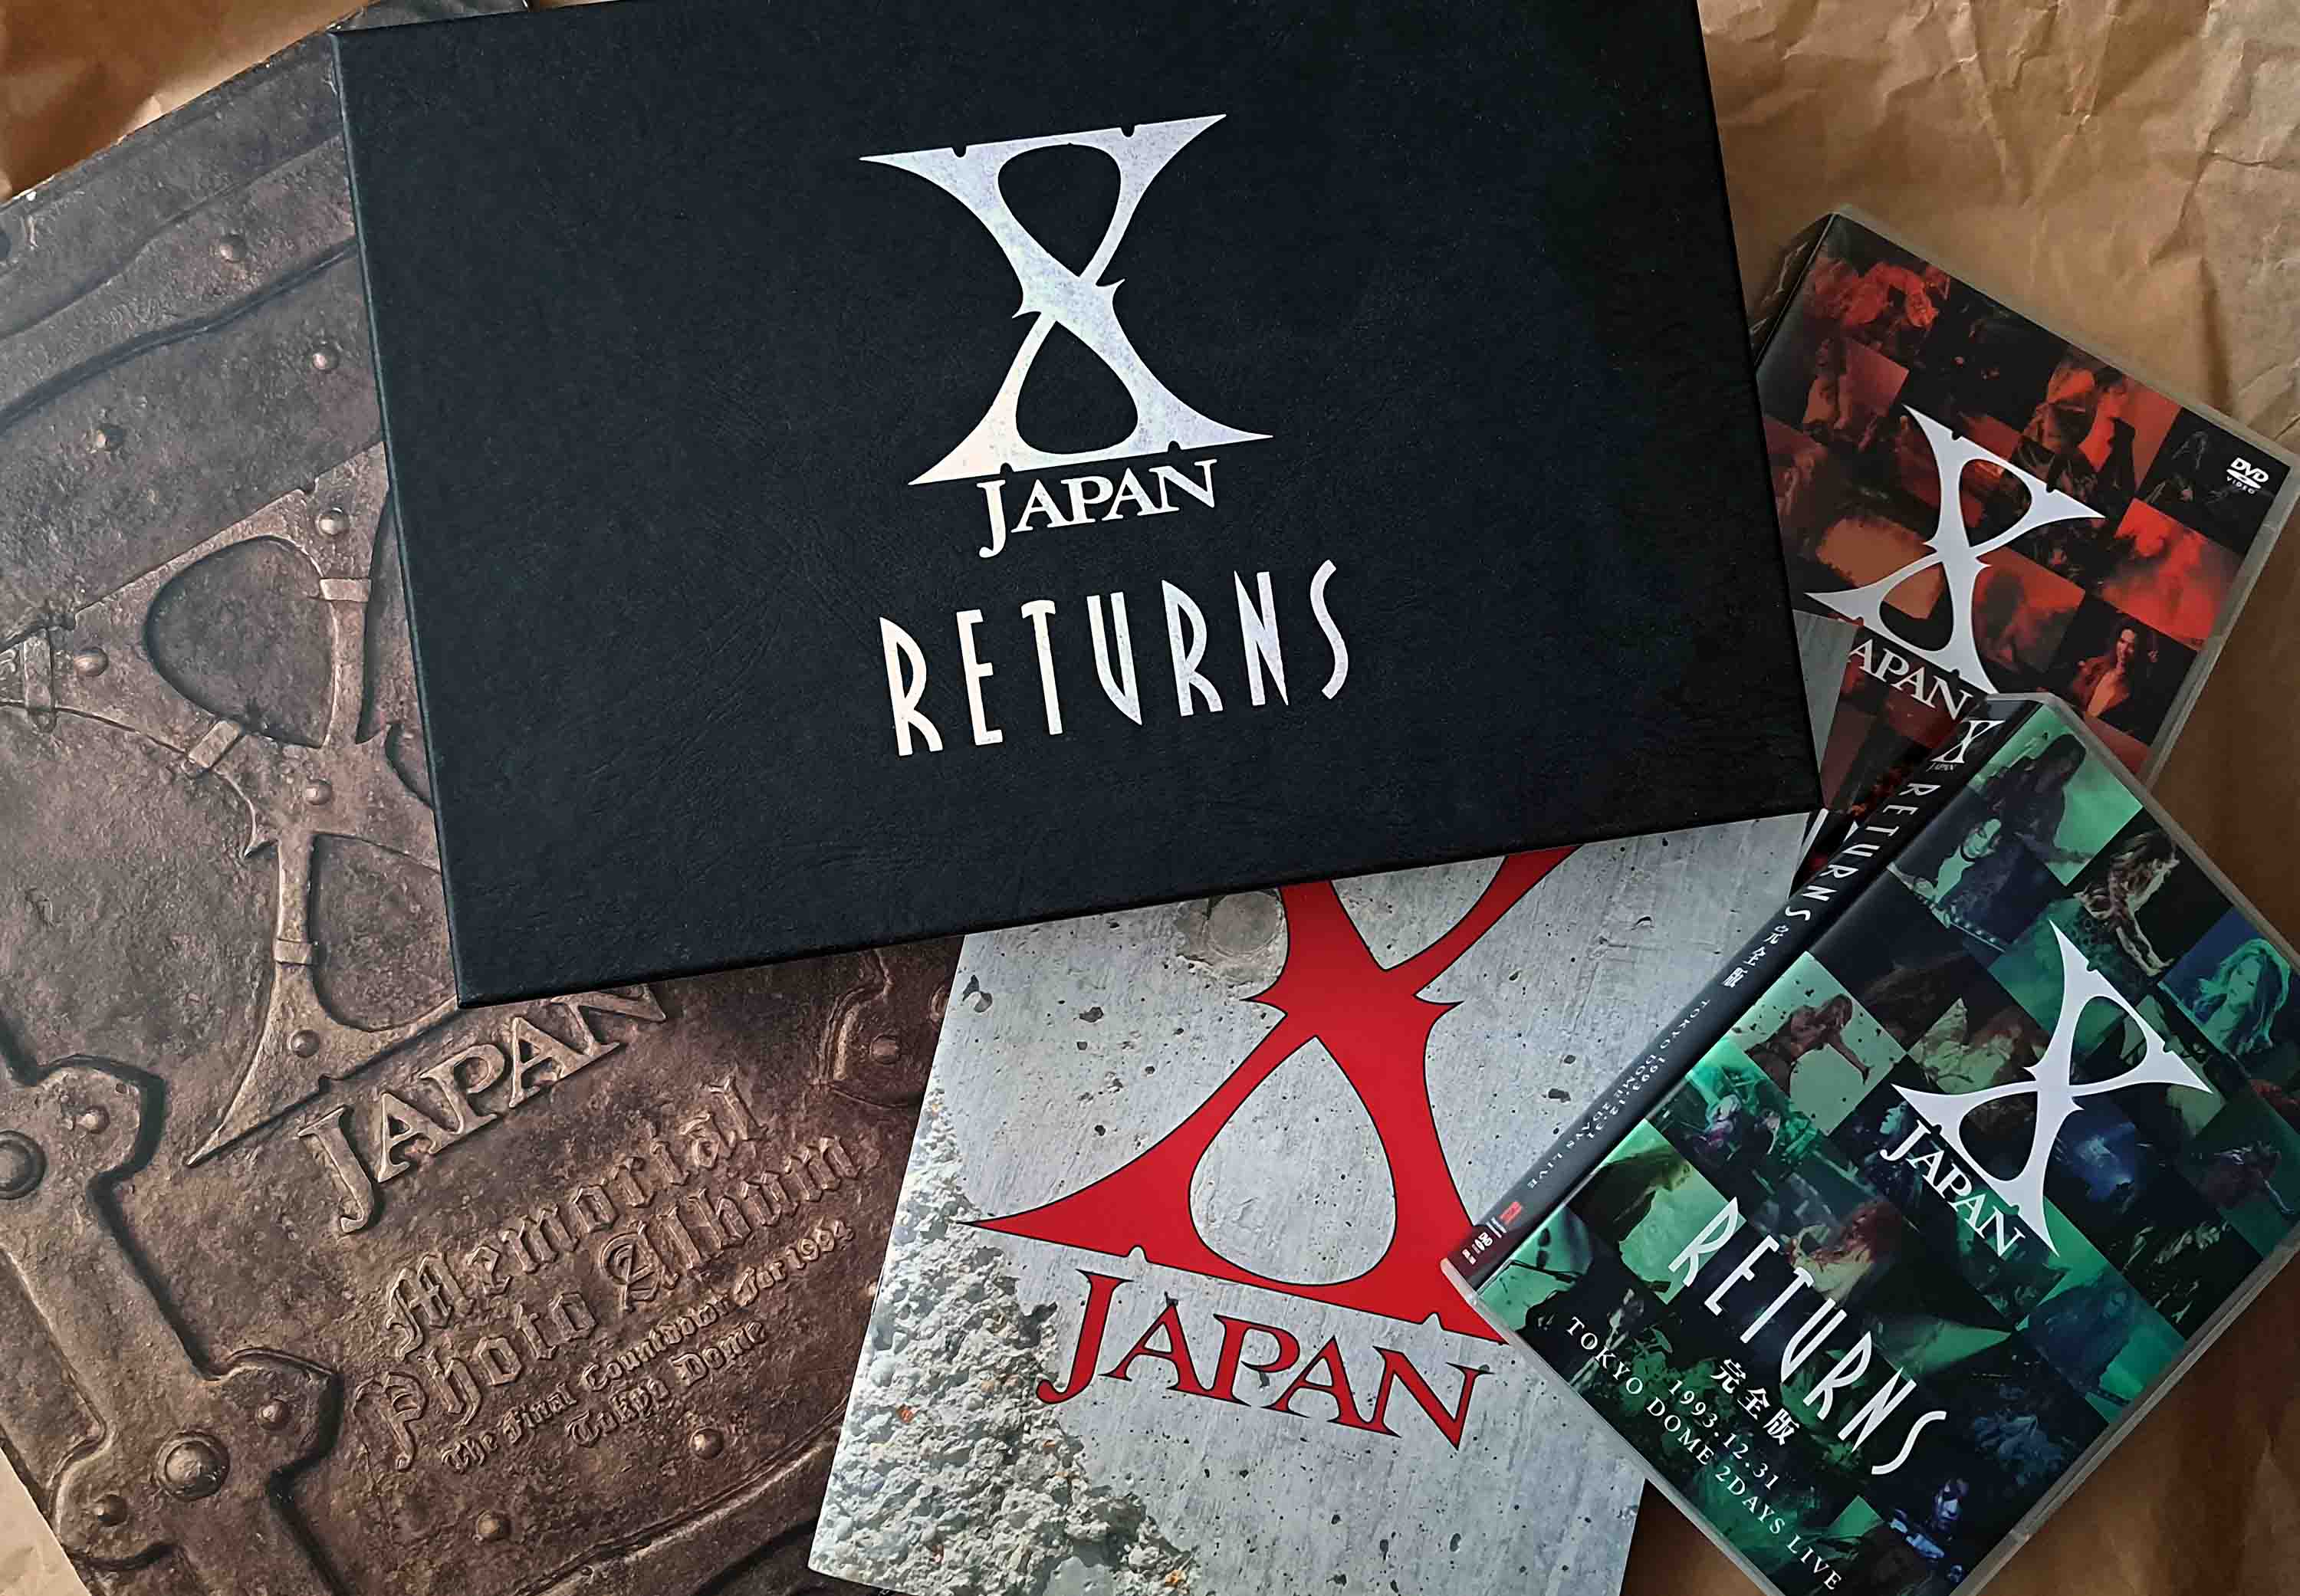 X Japan Returns, Tokyo Dome, 30 and 31 December 1993 – Tales From 